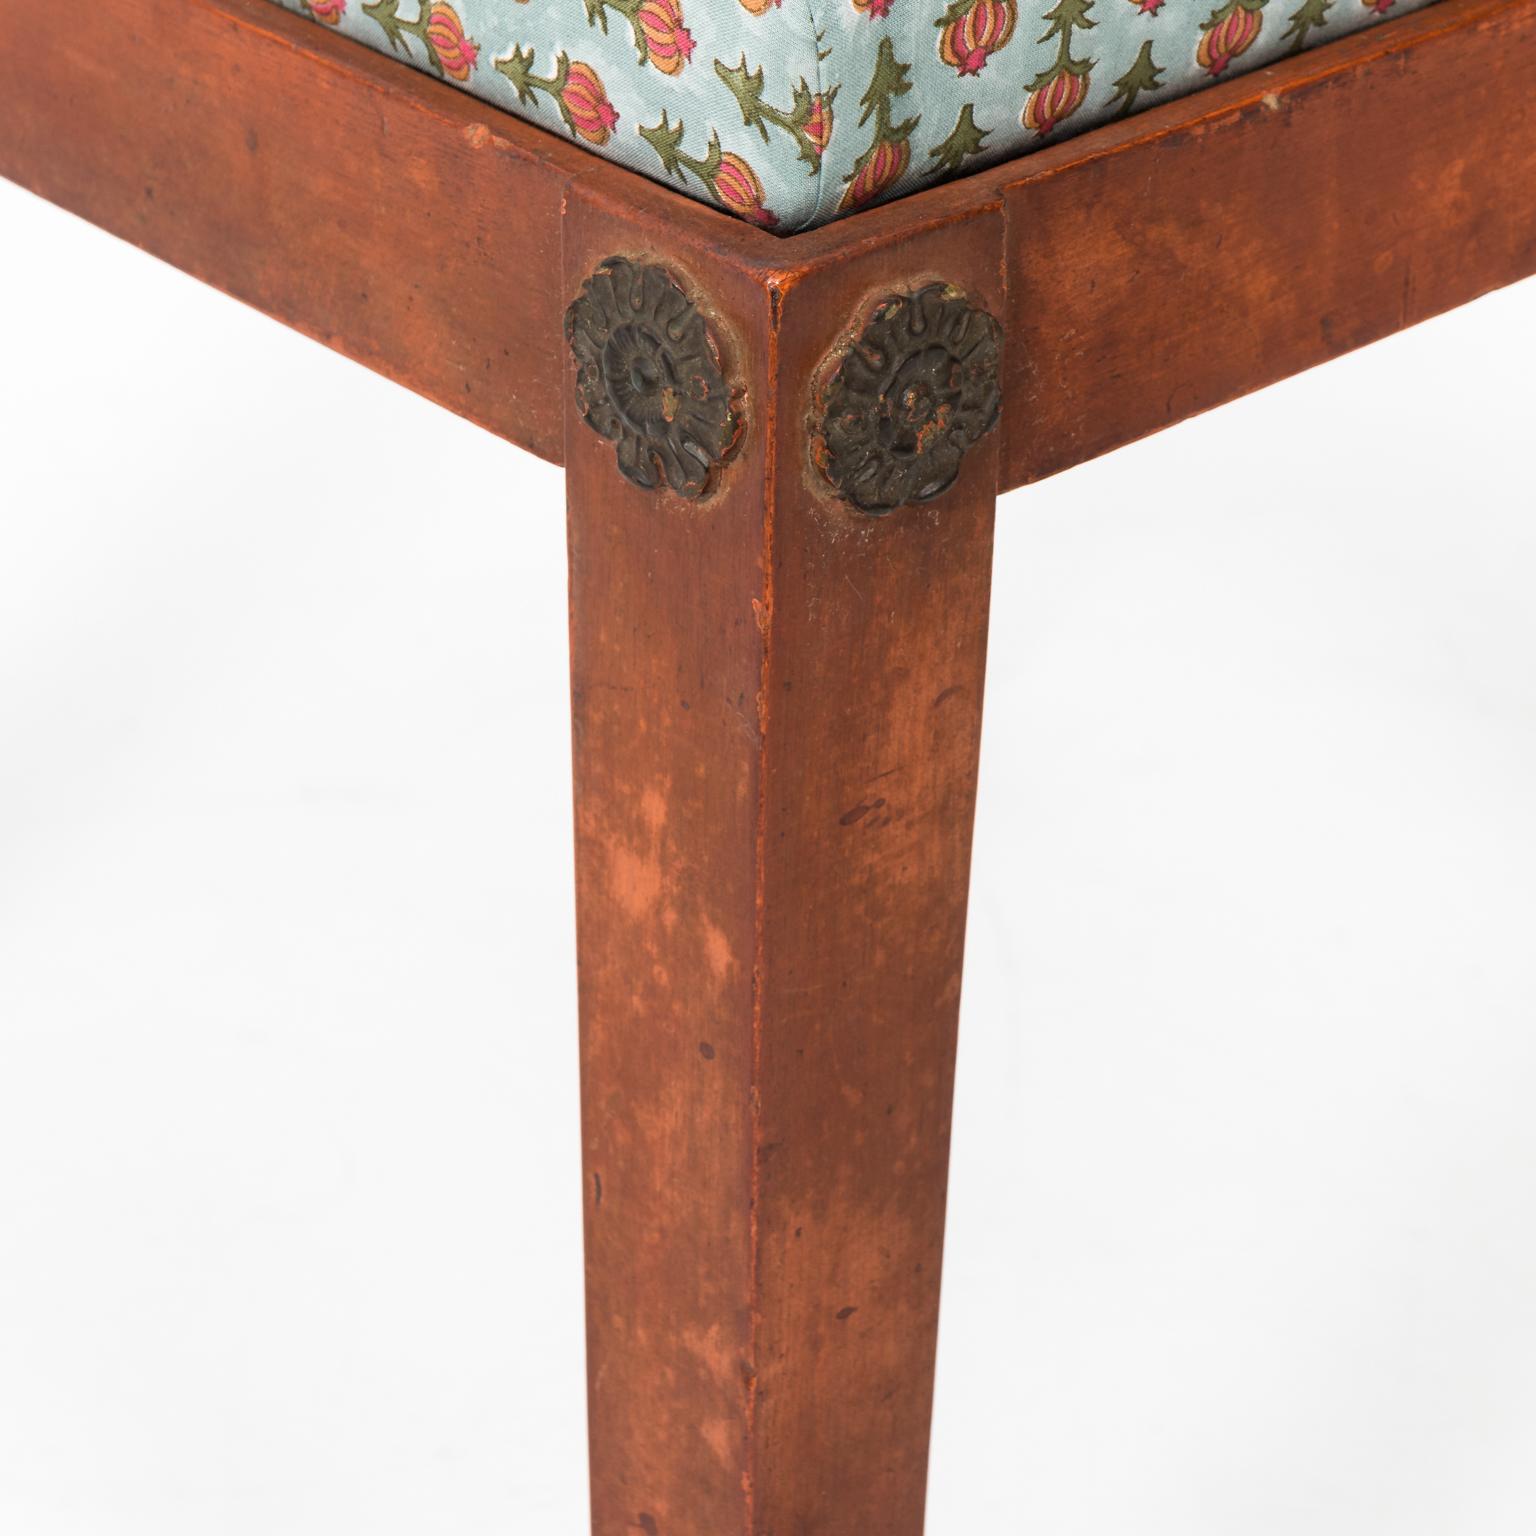 Floral upholstered benches with Lion's paw feet and painted legs, circa 20th century. Please note of wear consistent with age including oxidation to brass feet.
 